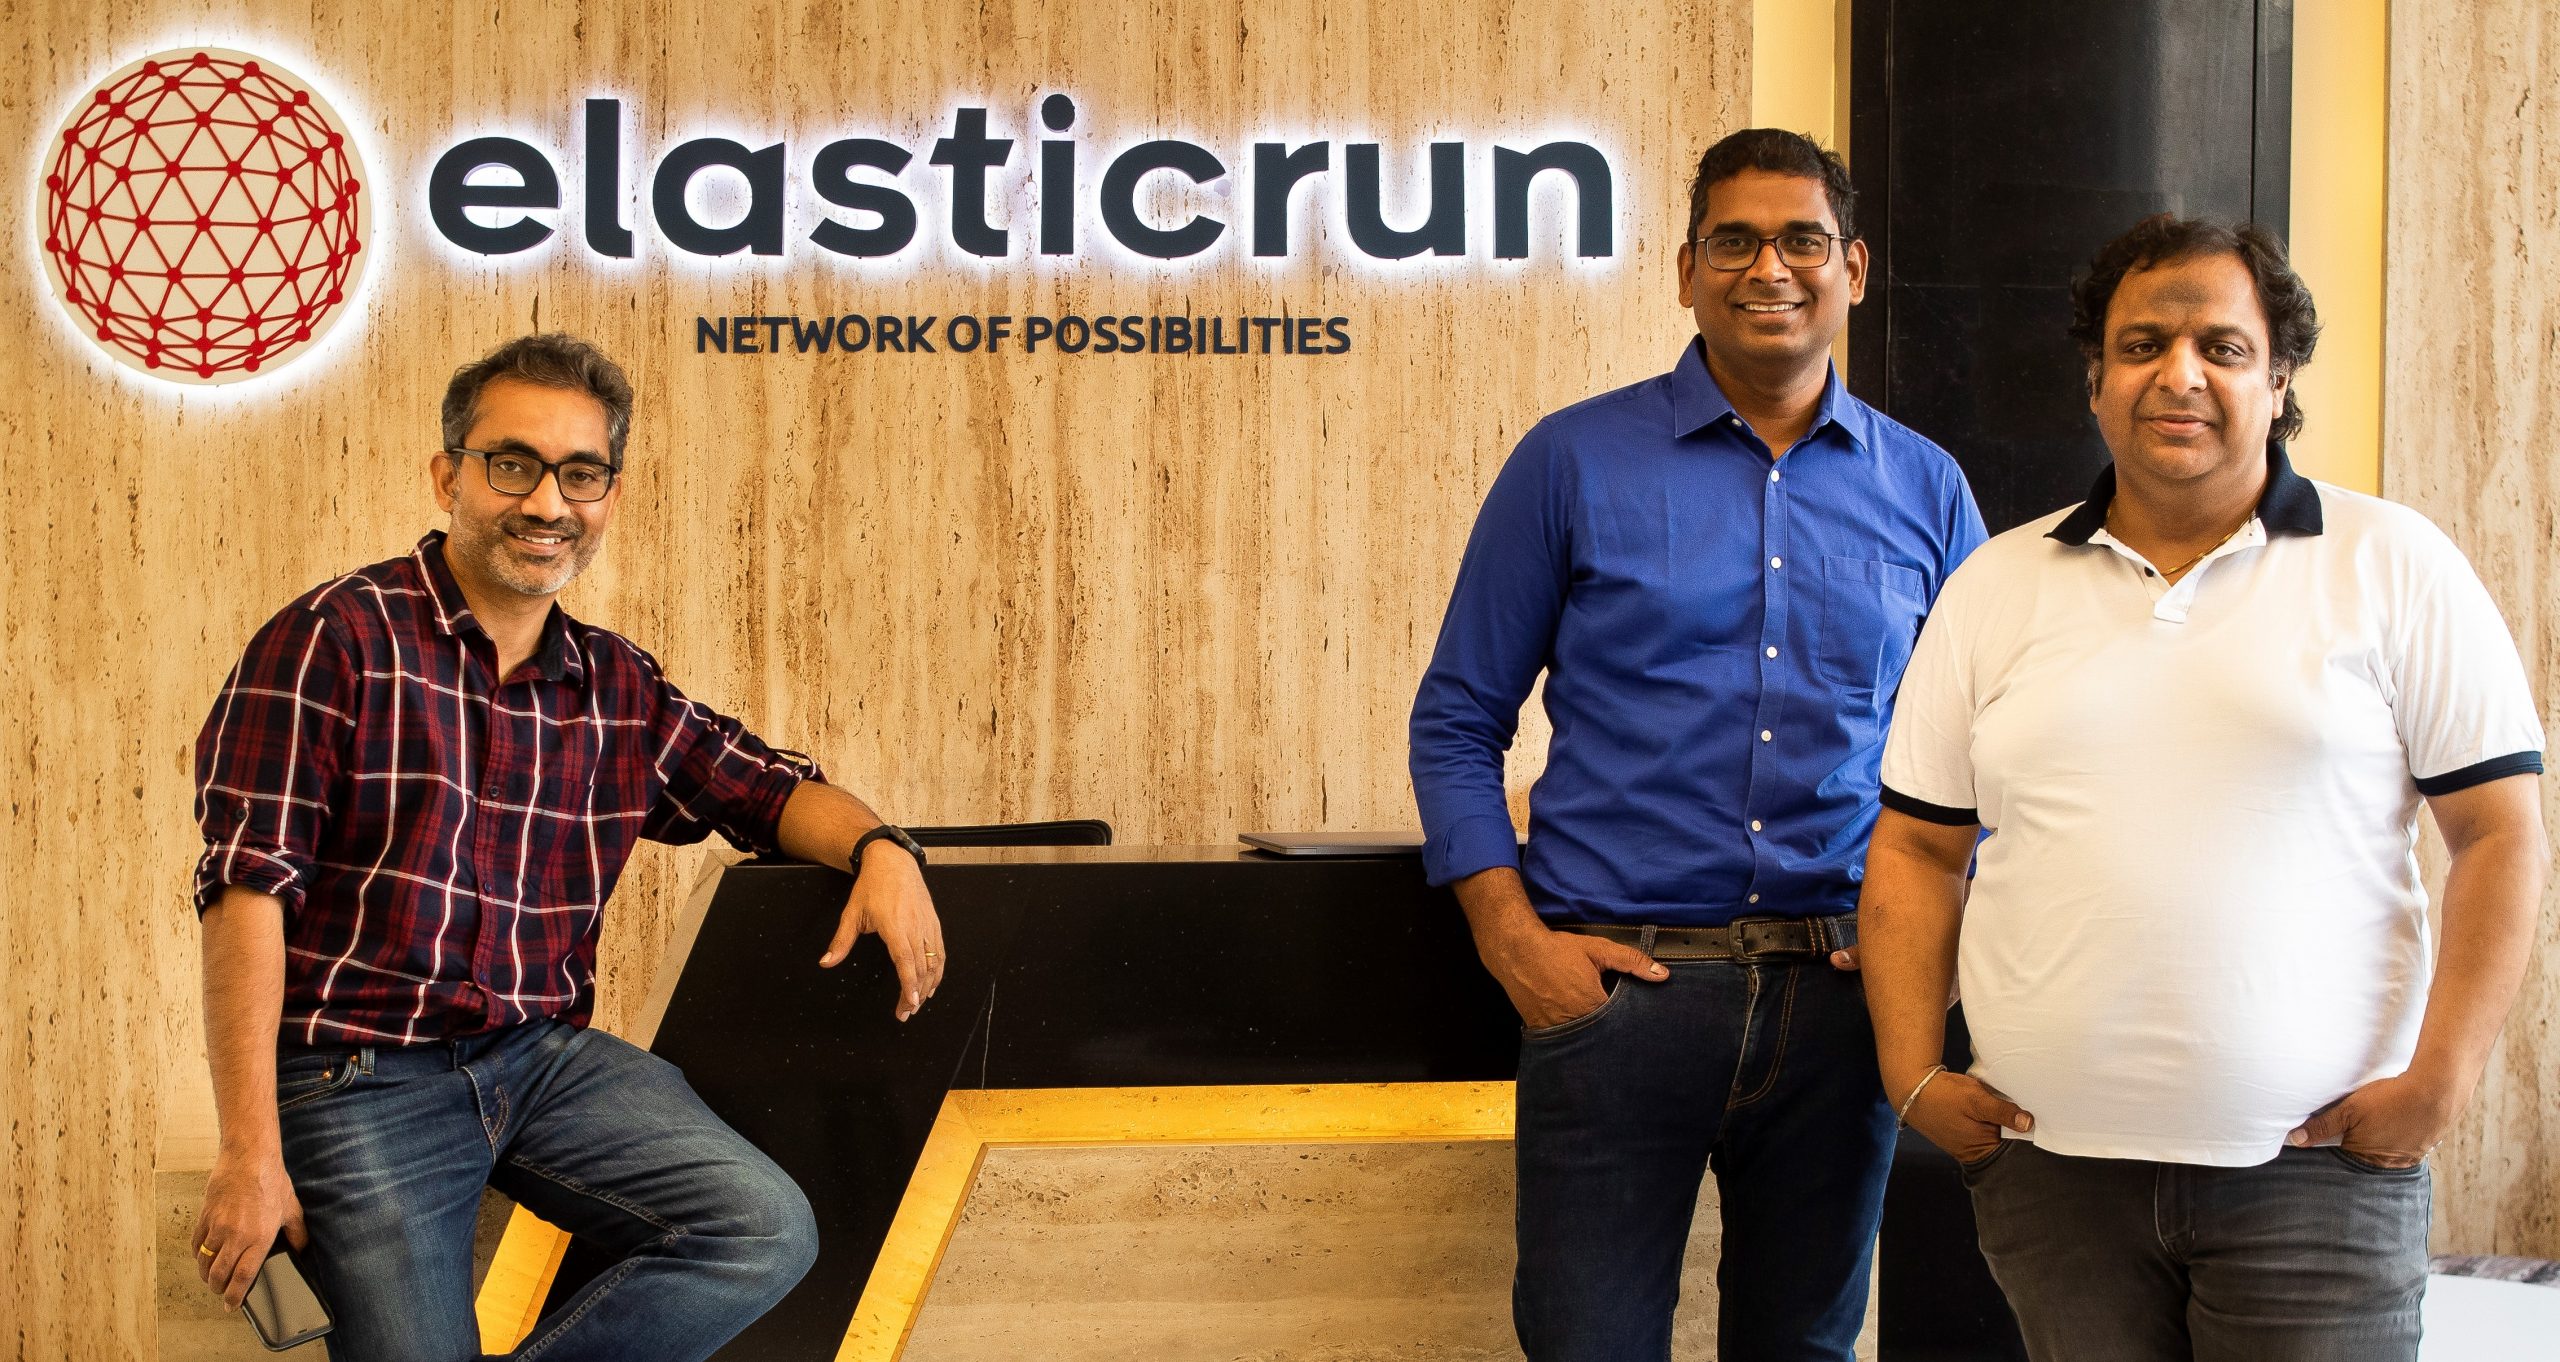 Three men standing in front of a wall with ElasticRun's logo